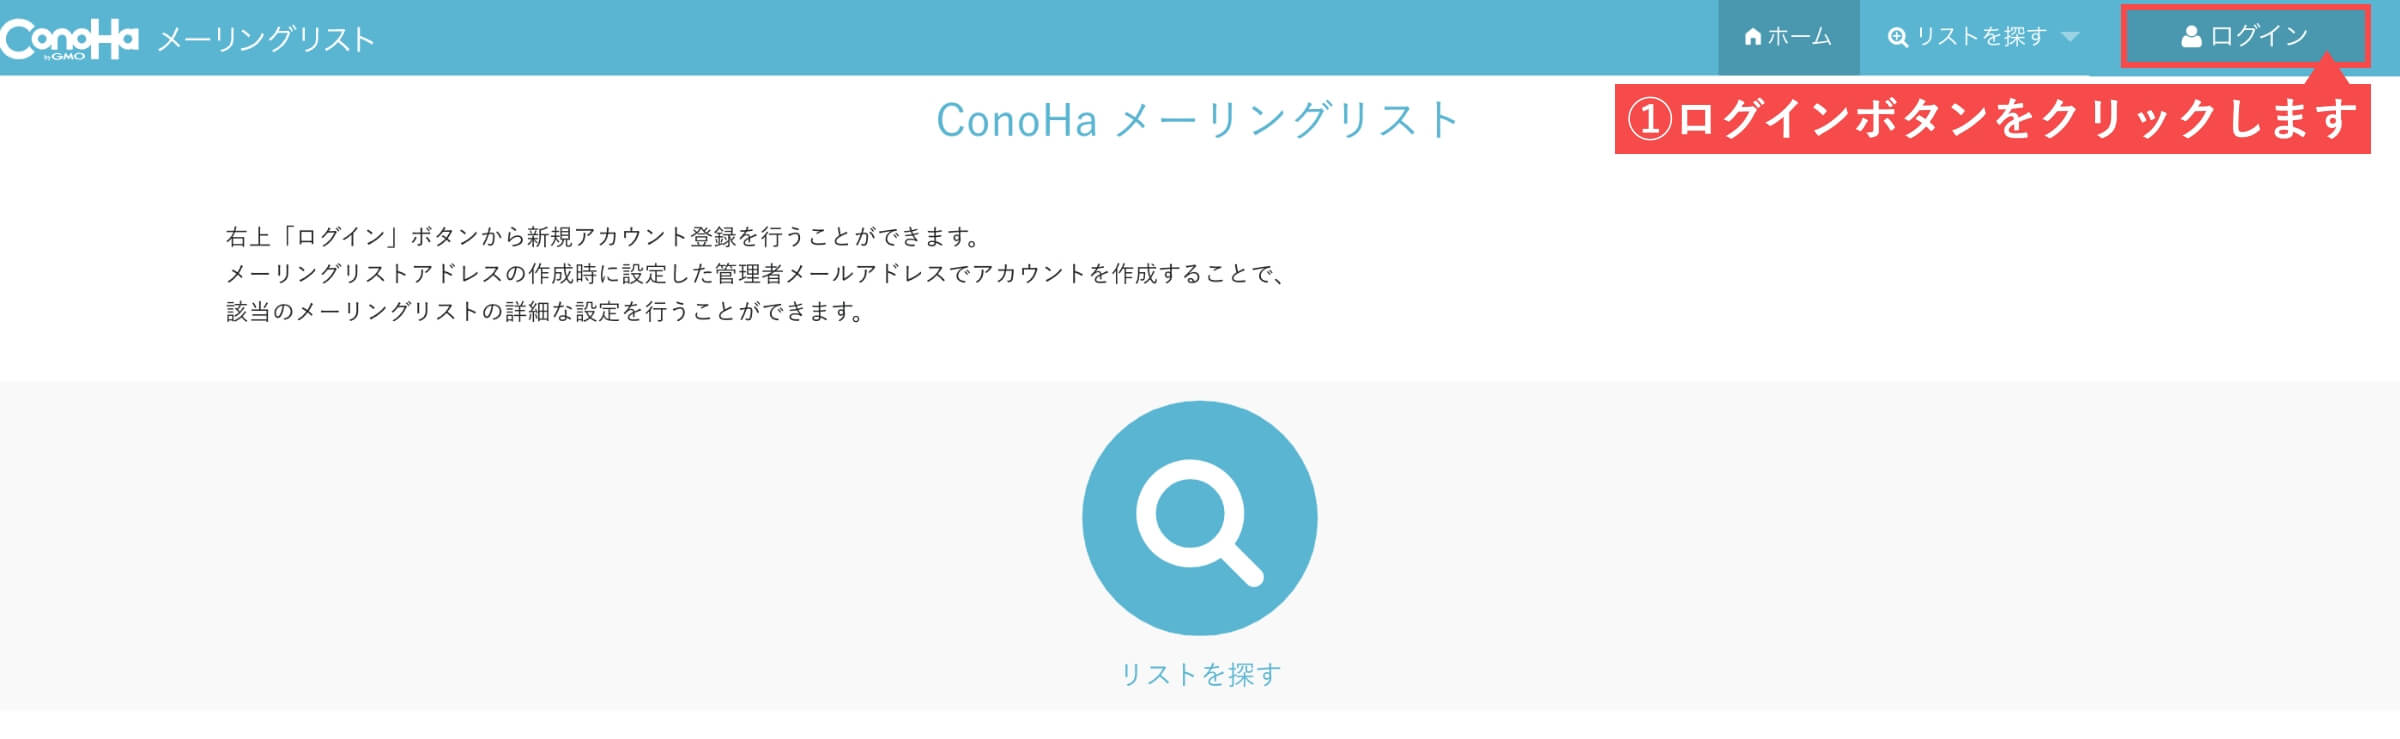 ConoHa WINGのメーリングリスト管理画面